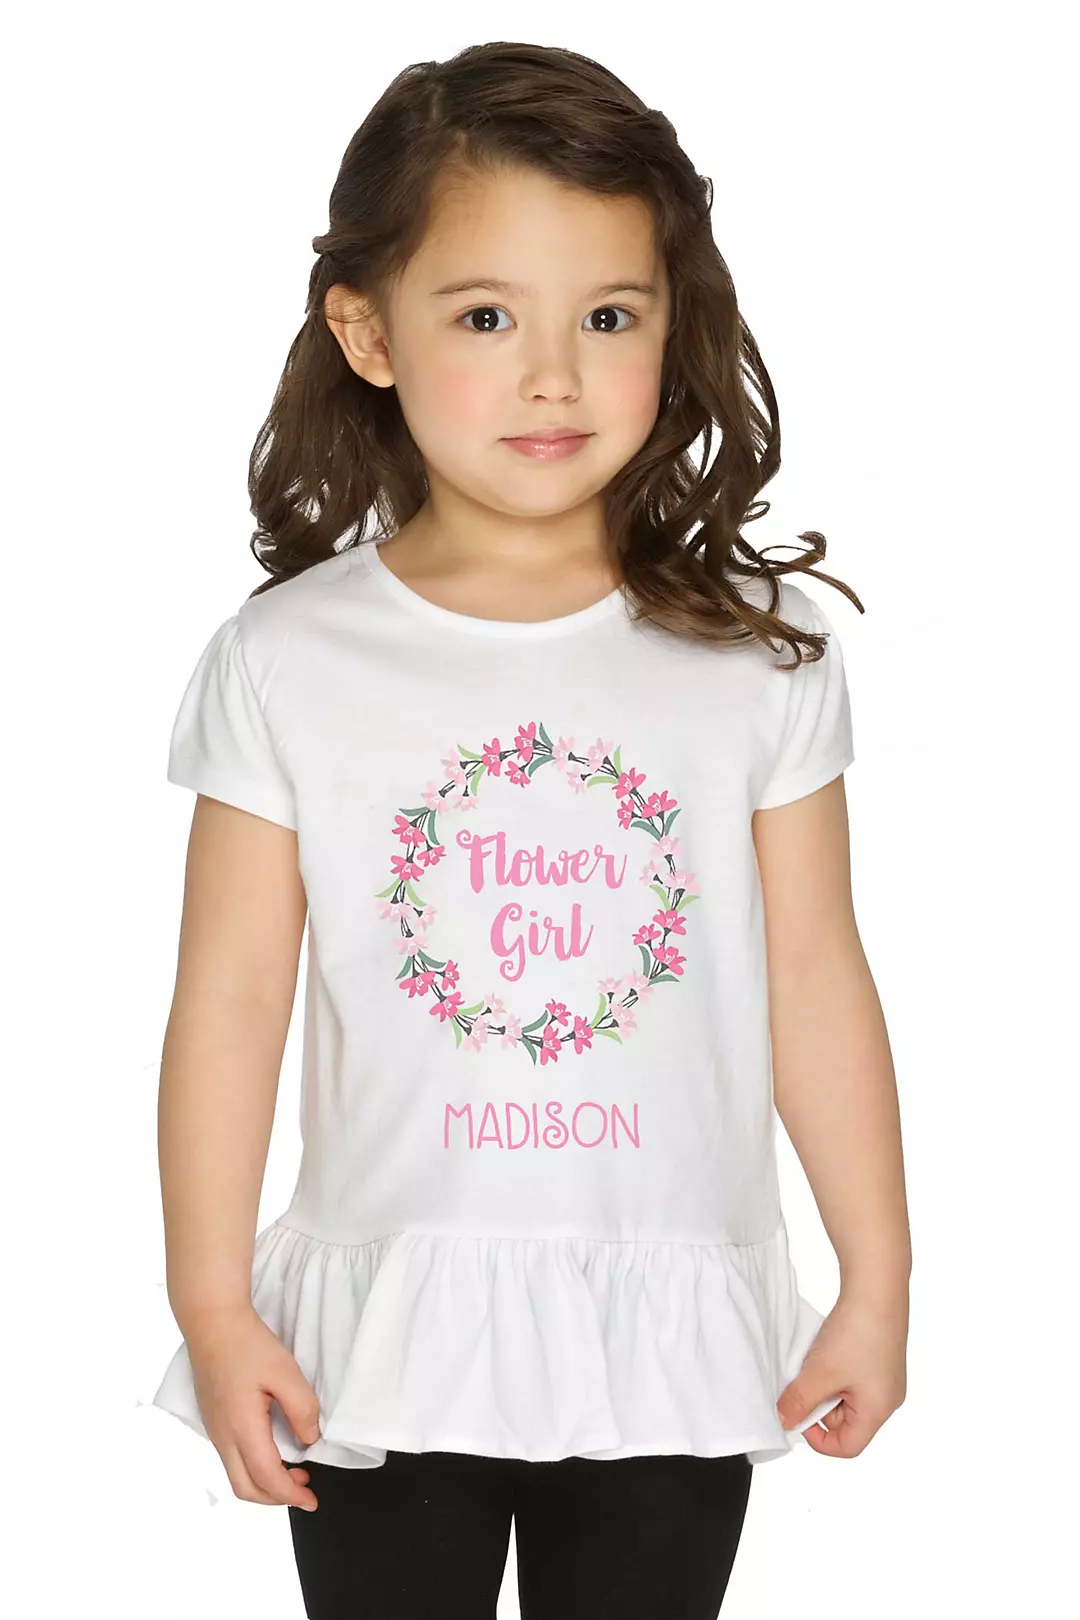 Personalized Flower Girl Shirt Image